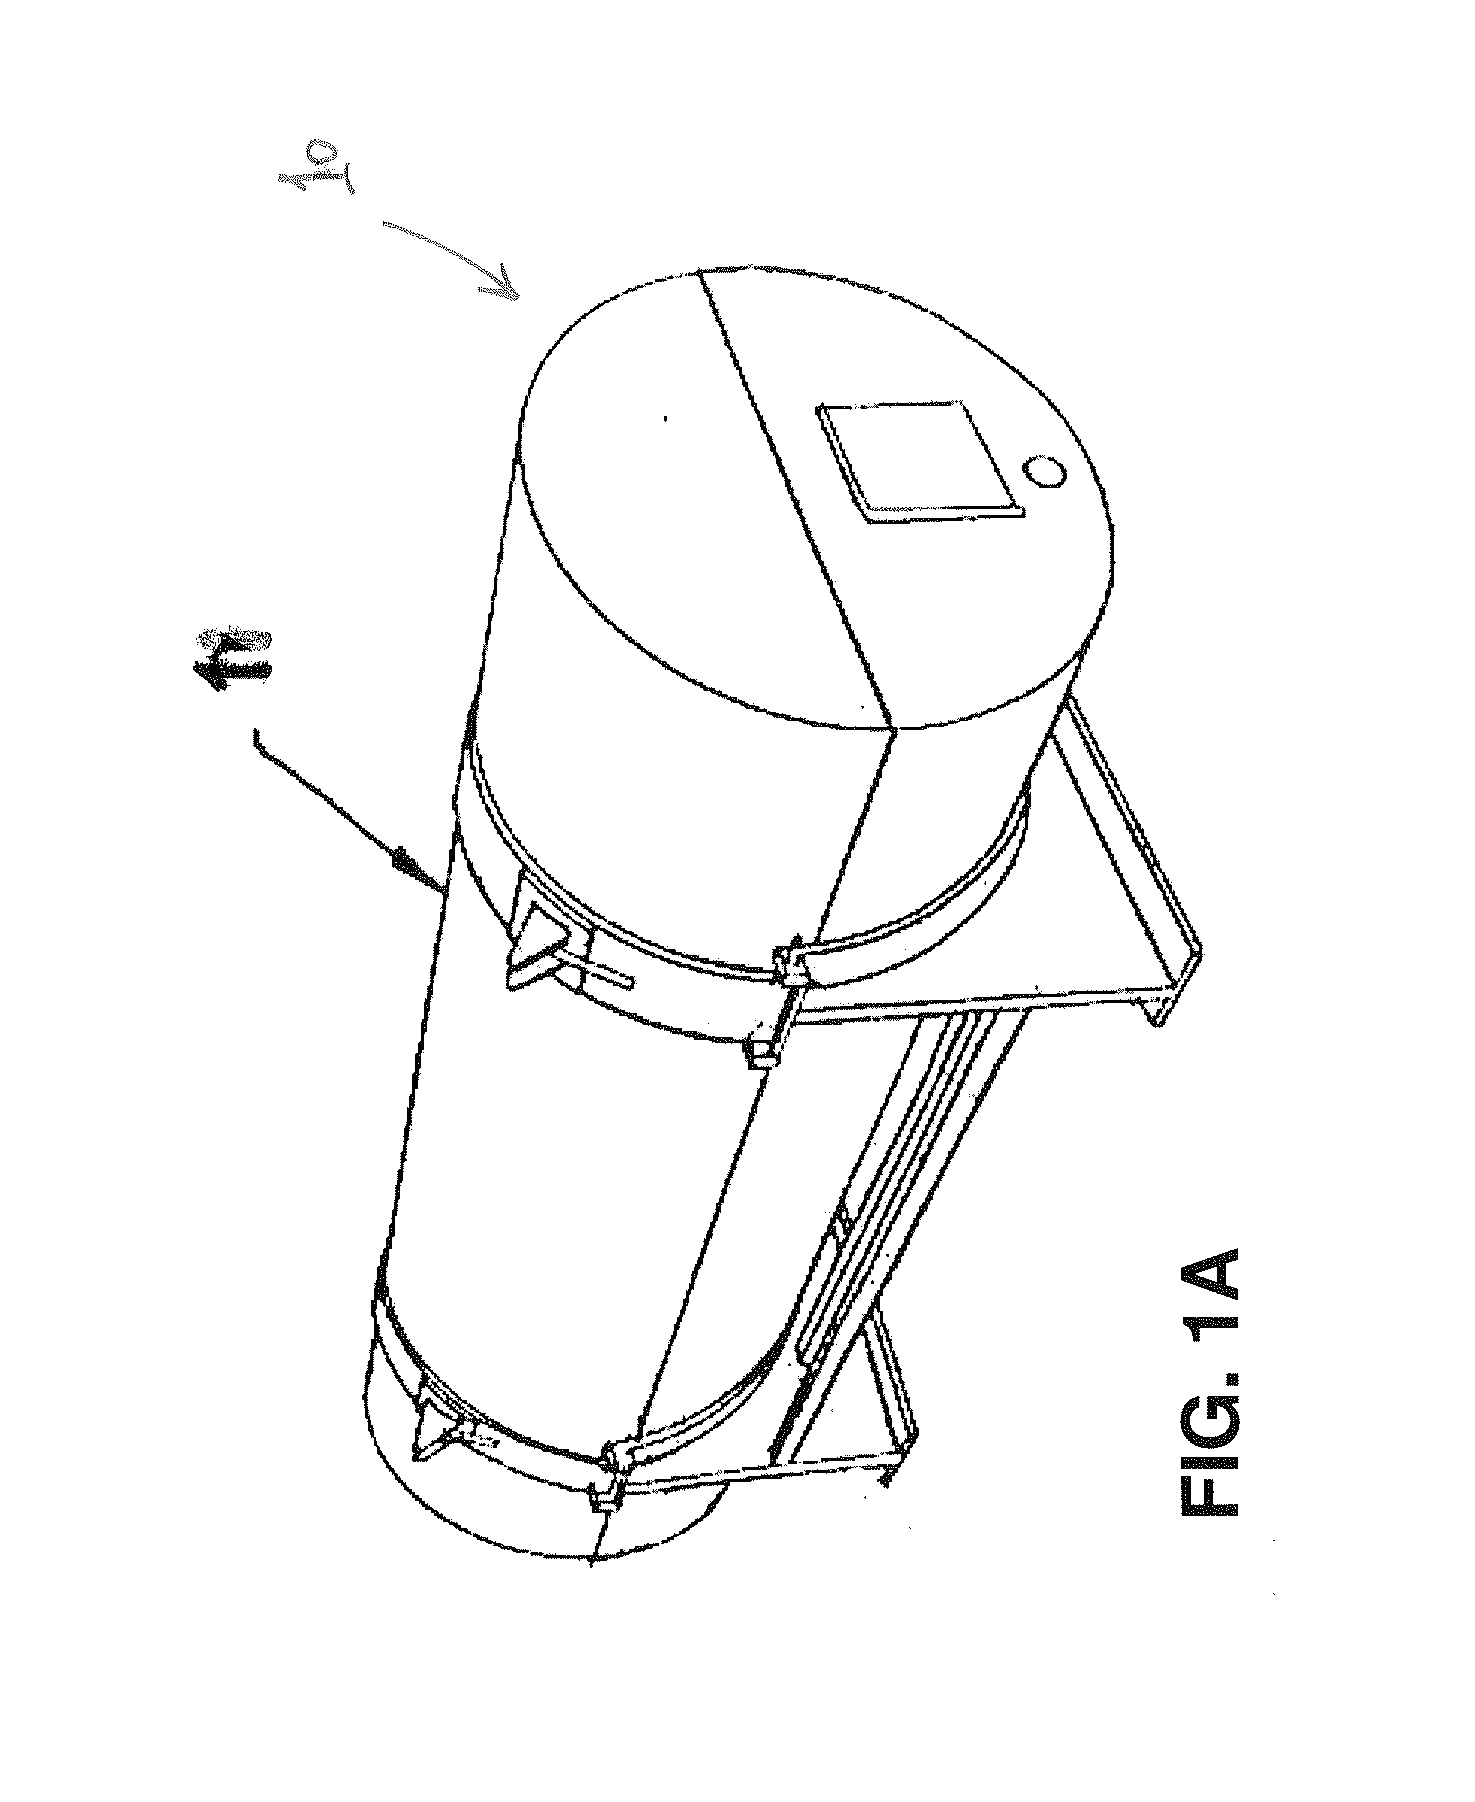 Container for transporting and storing uranium hexaflouride